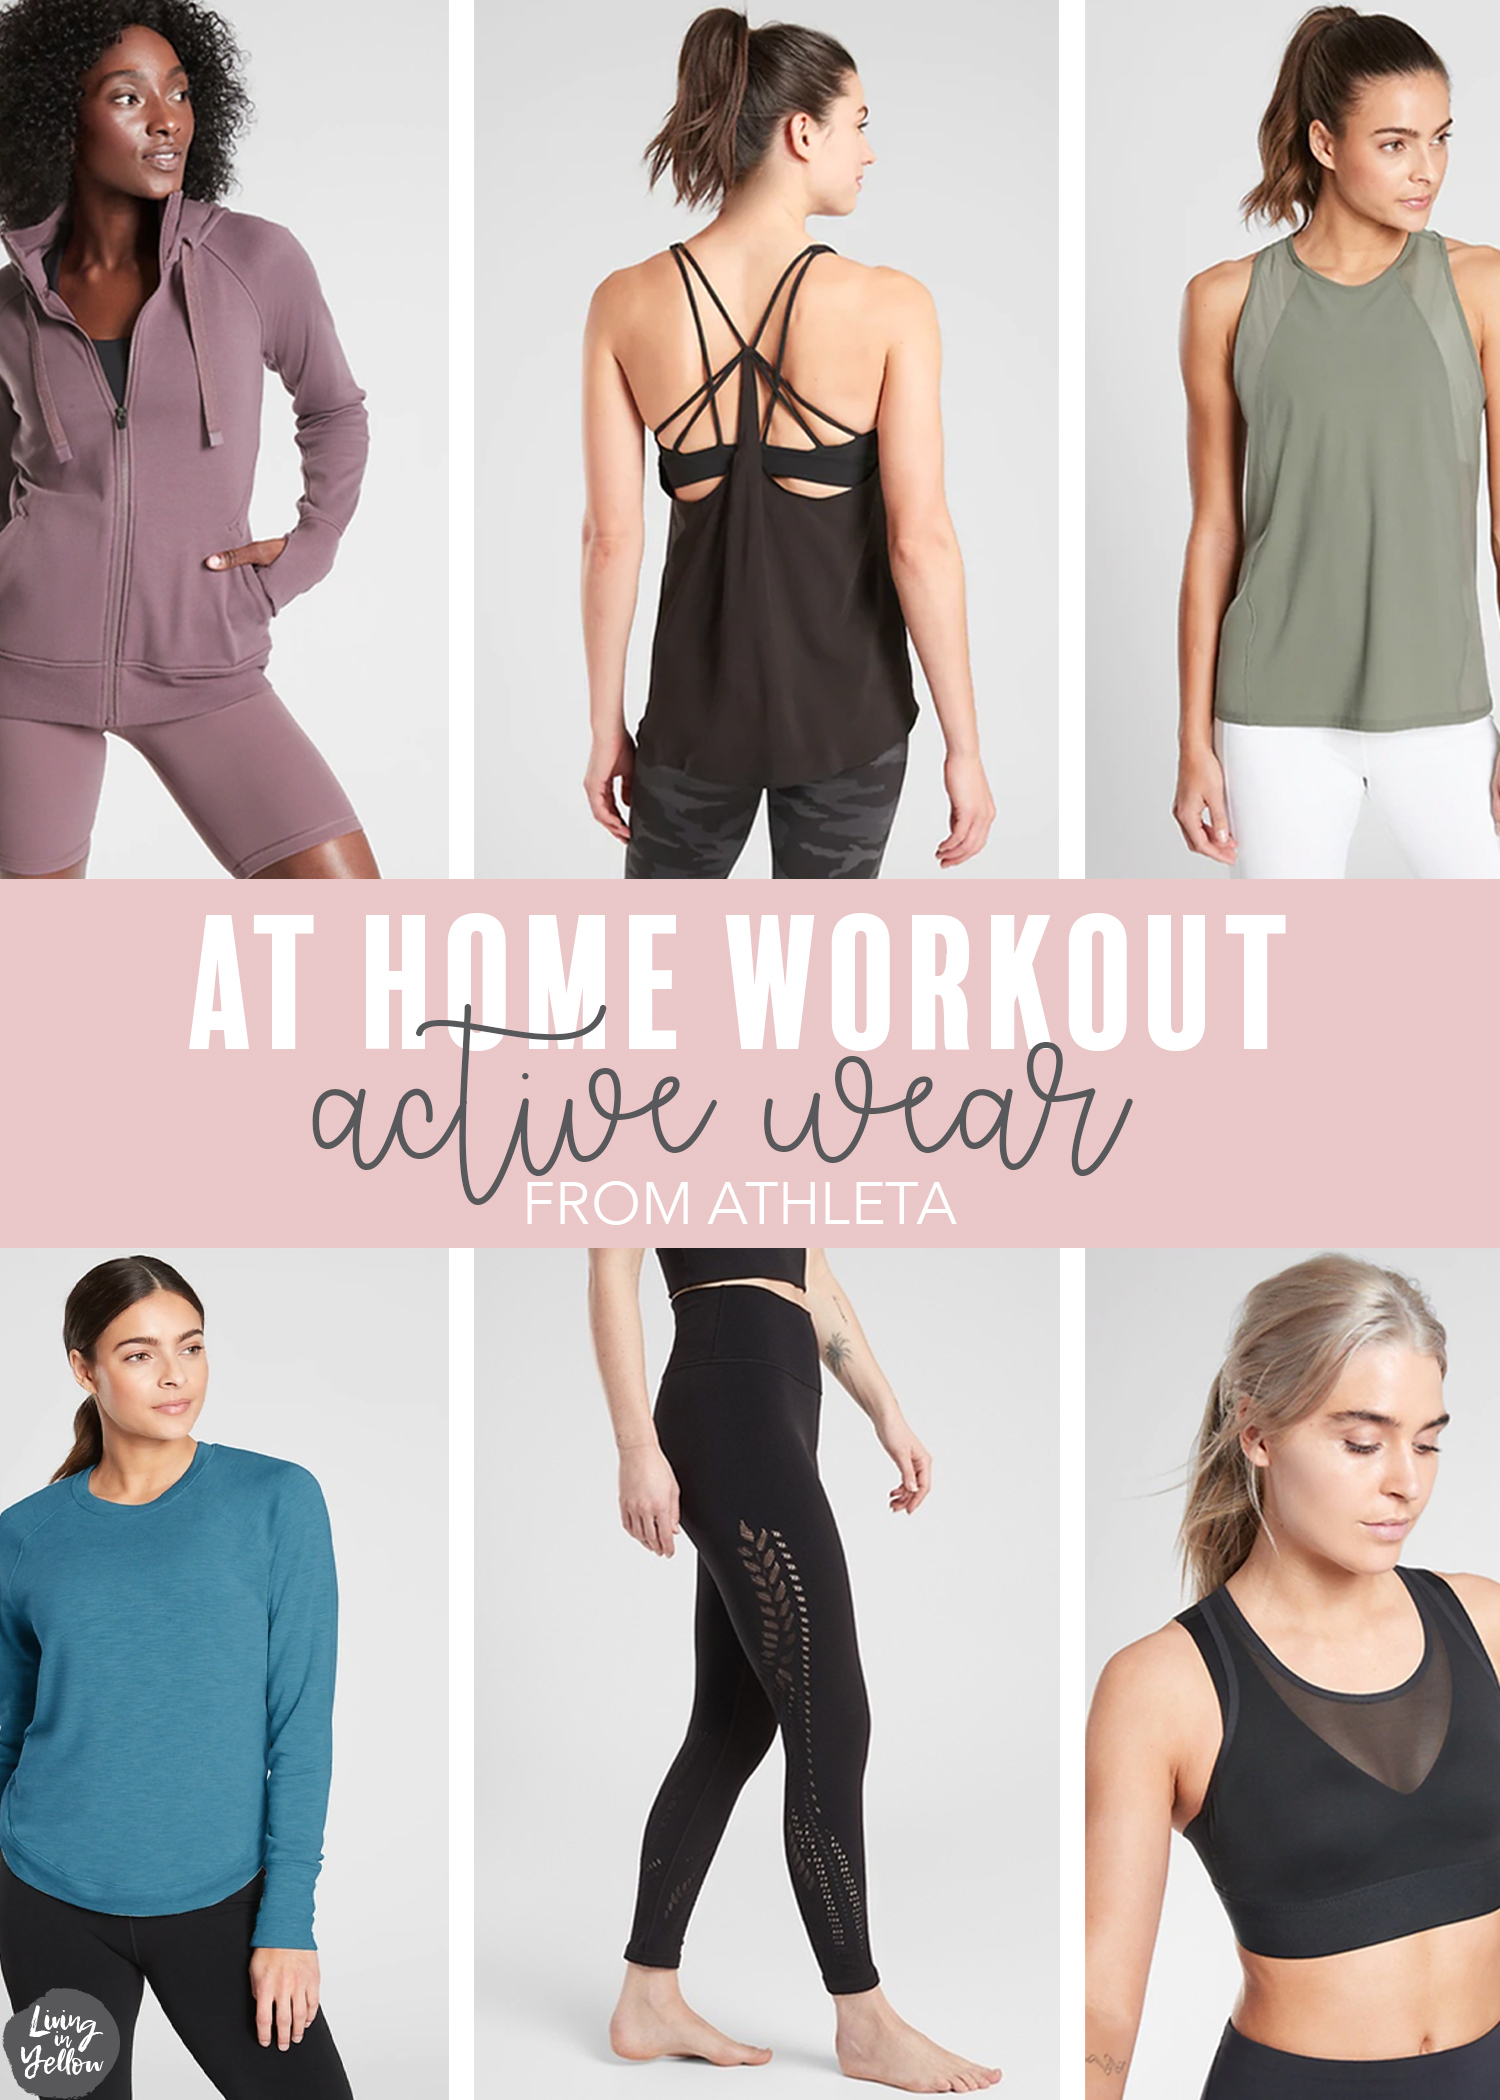 I'm Loving: Aim'n sportswear and active wear for comfort and style